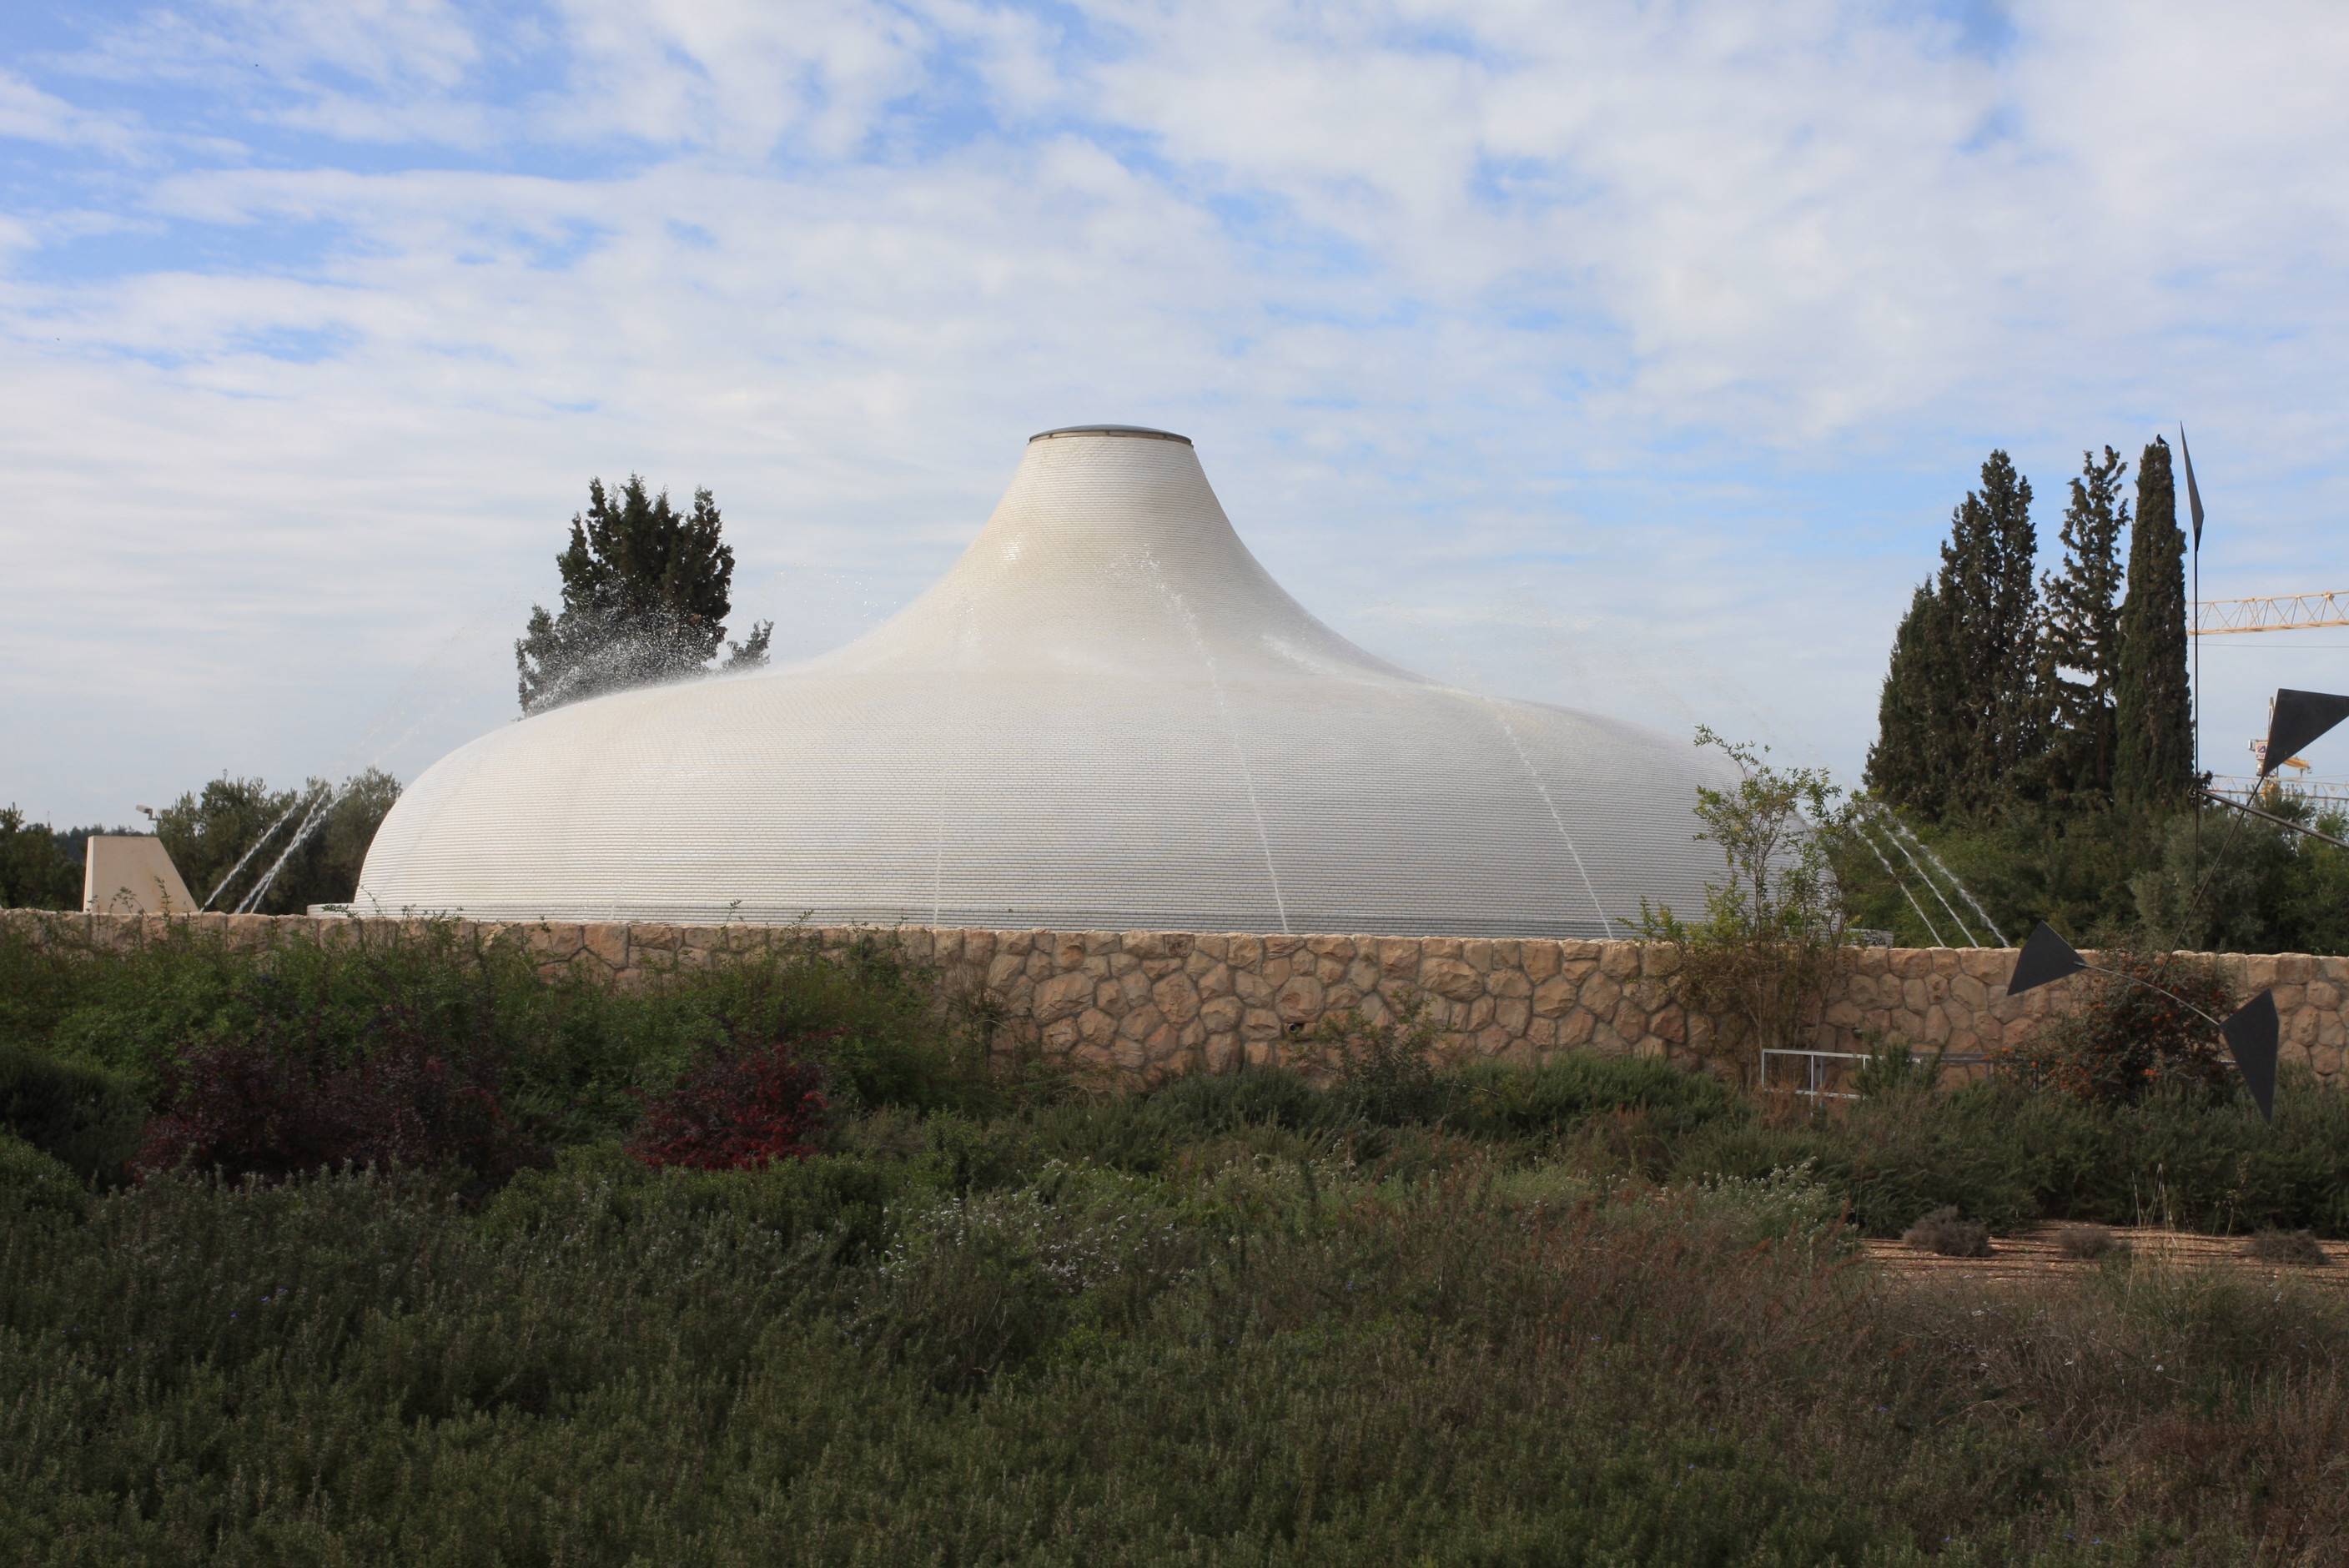 Shrine of the Book, home of the real Dead Sea Scrolls